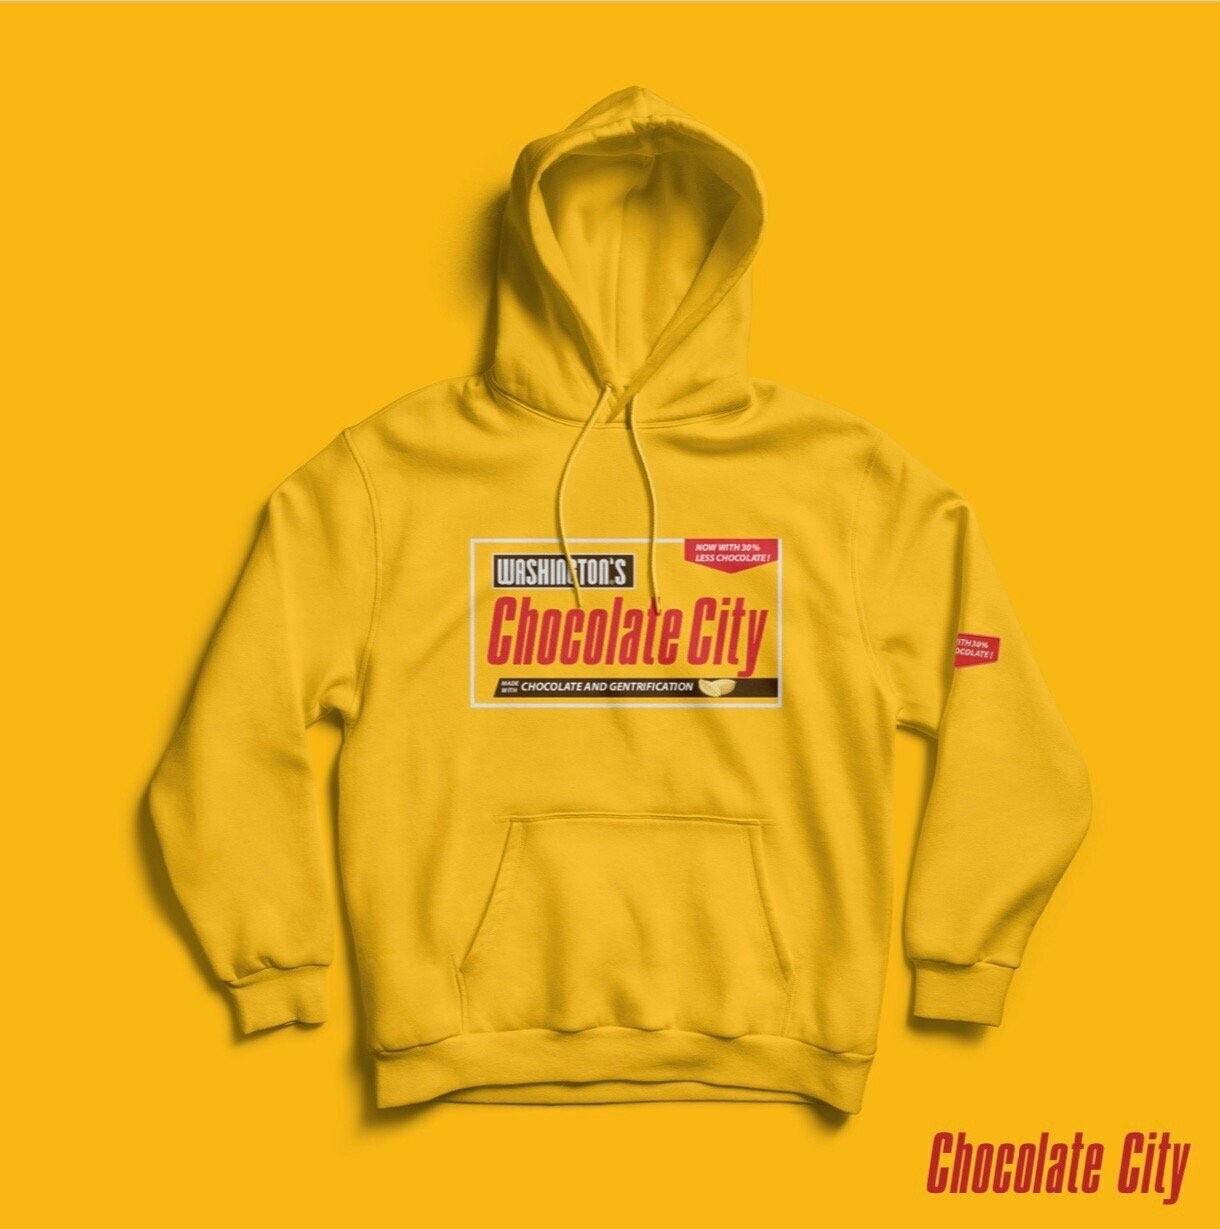 (202) Chocolate City Hoodie in GOLD, Size: S